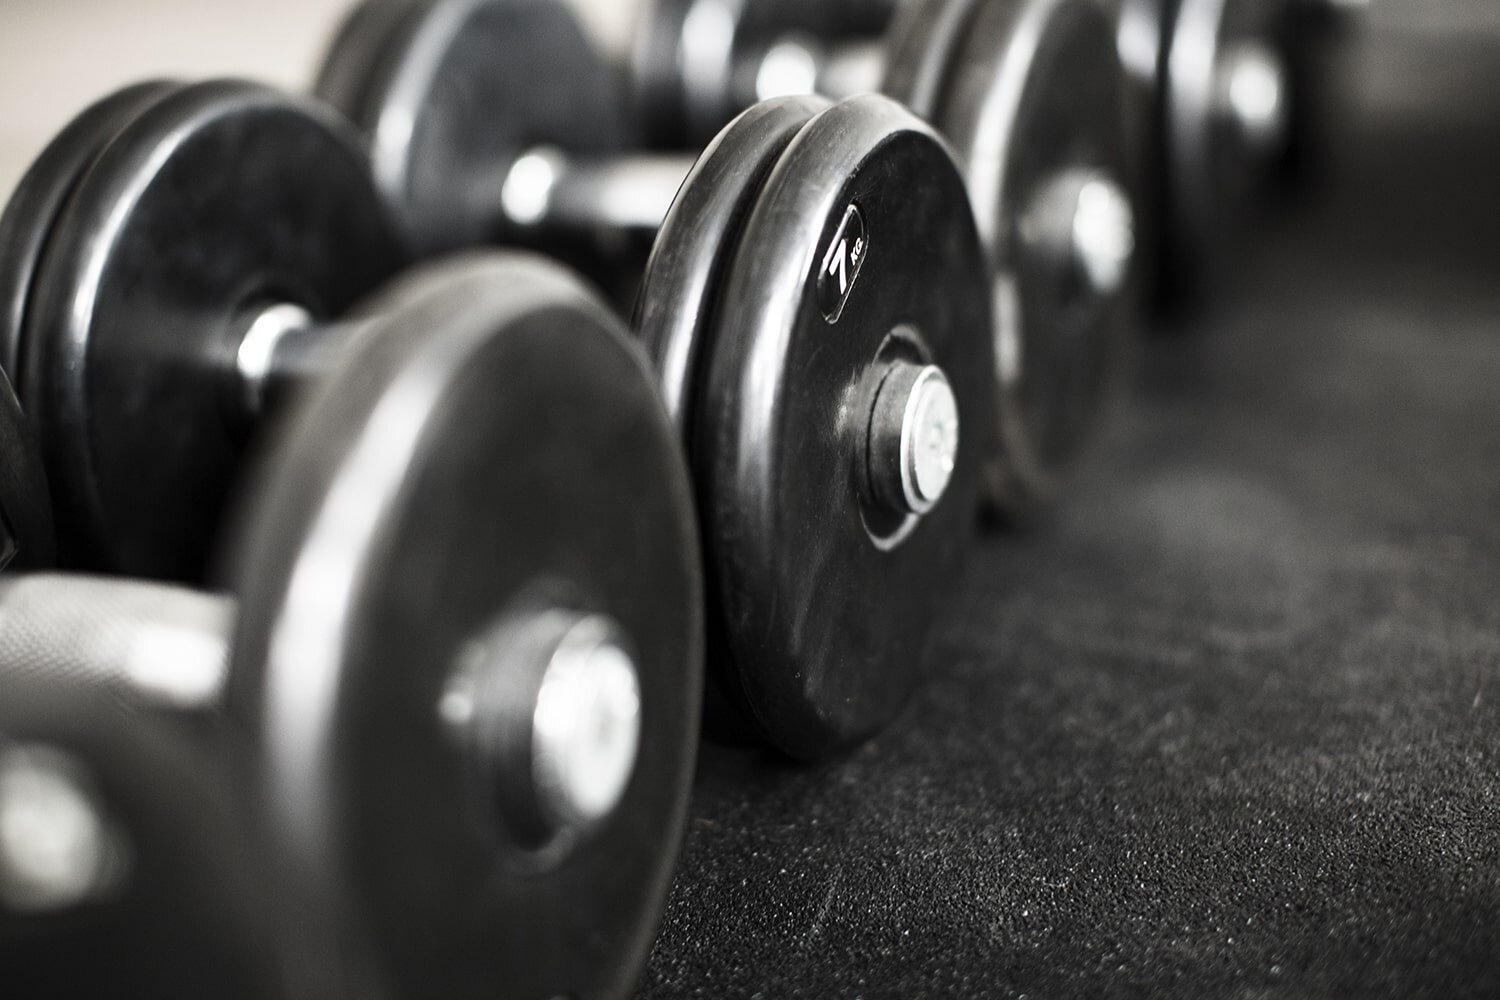 Dumbbells in a row